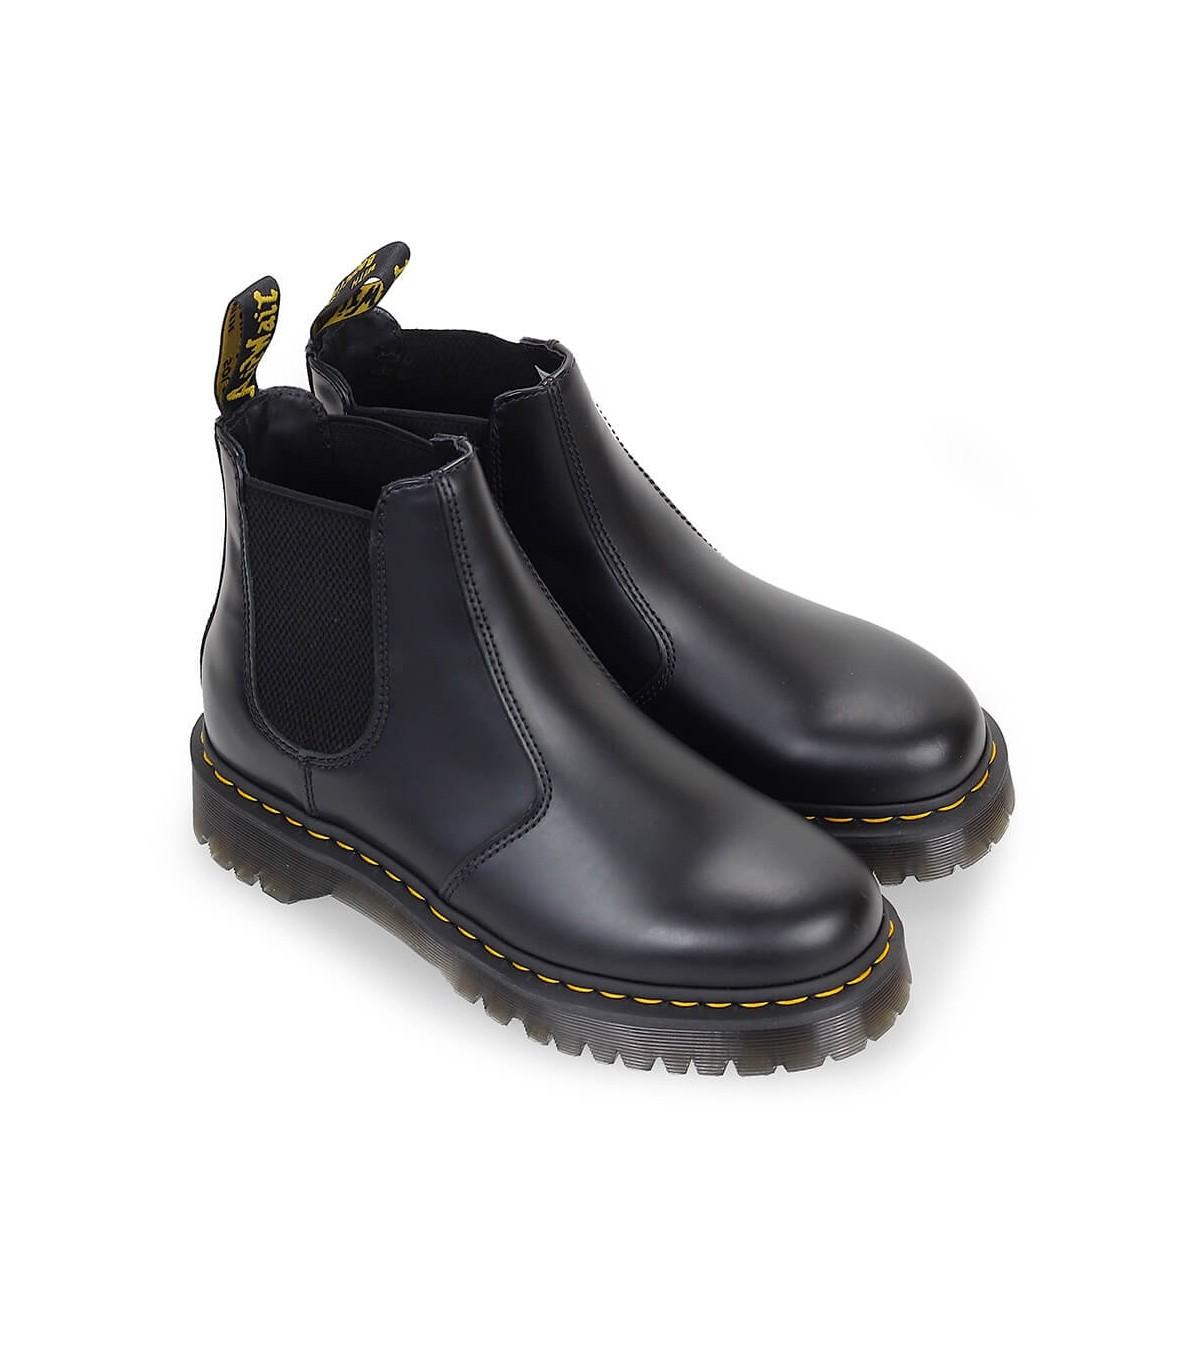 Dr. Martens 2976 Bex Smooth Chelsea Boot in Black | Lyst